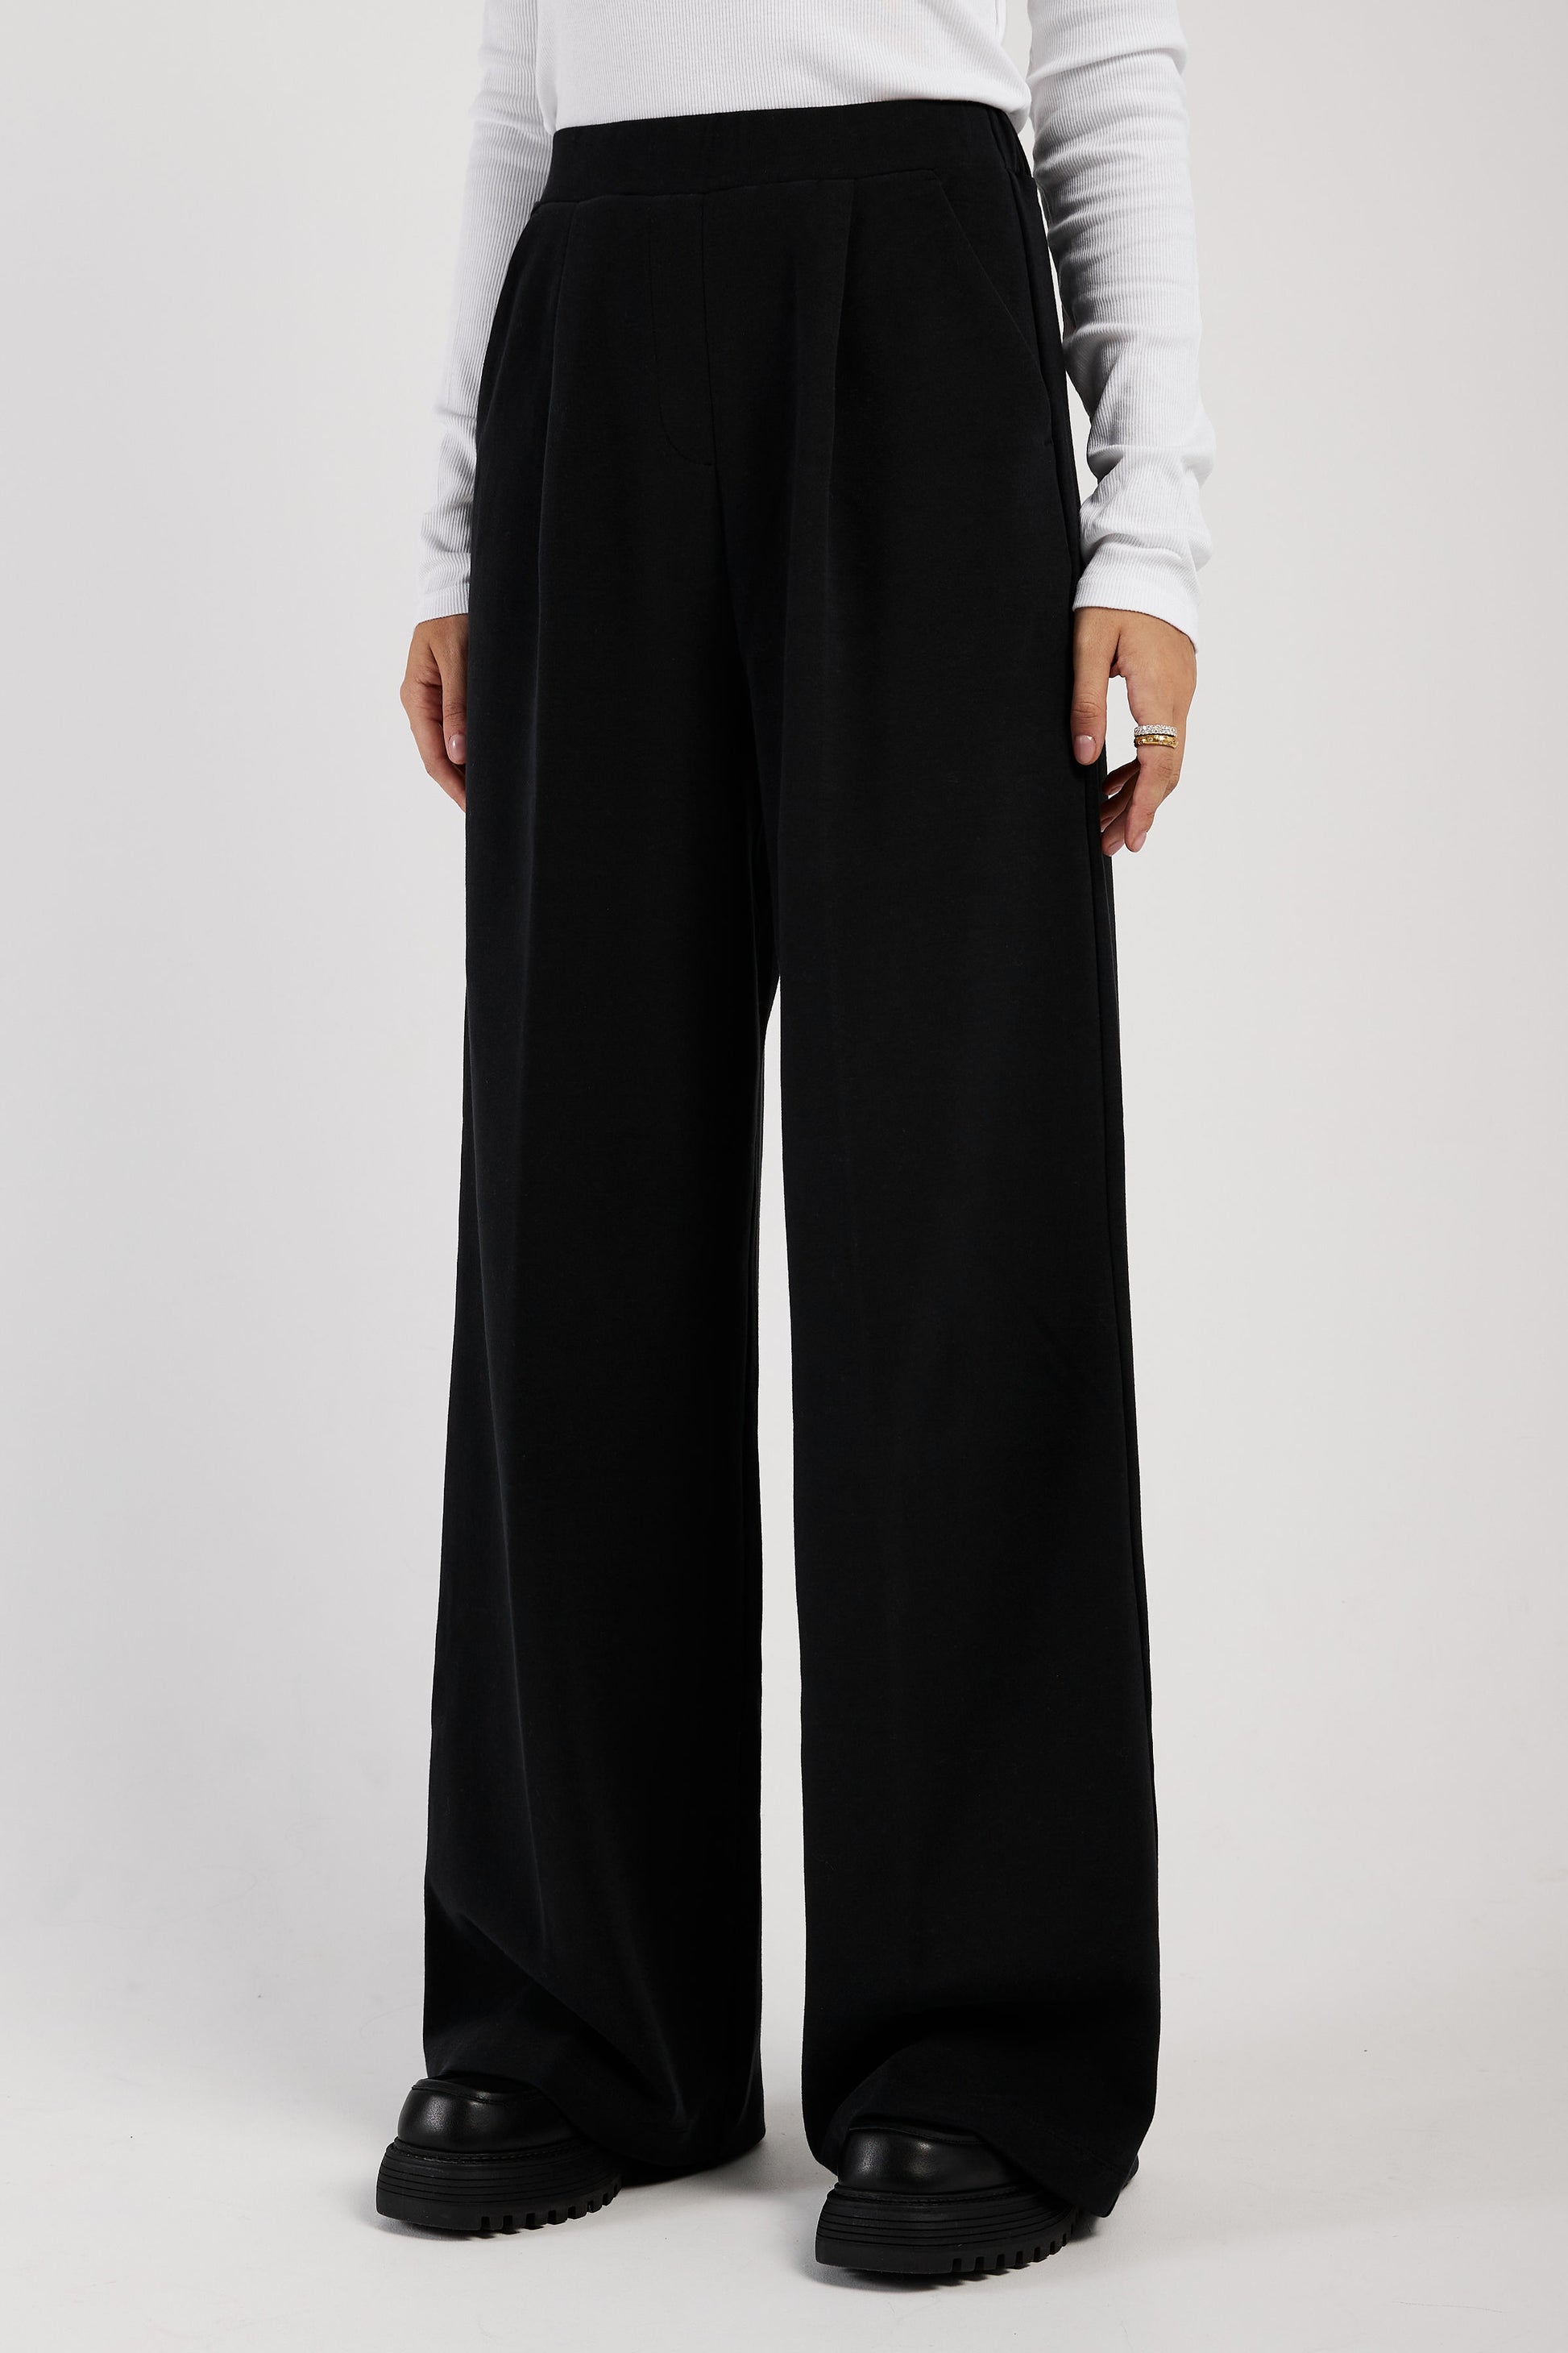 MAX MARA LEISURE Canter Jersey Pant in Black